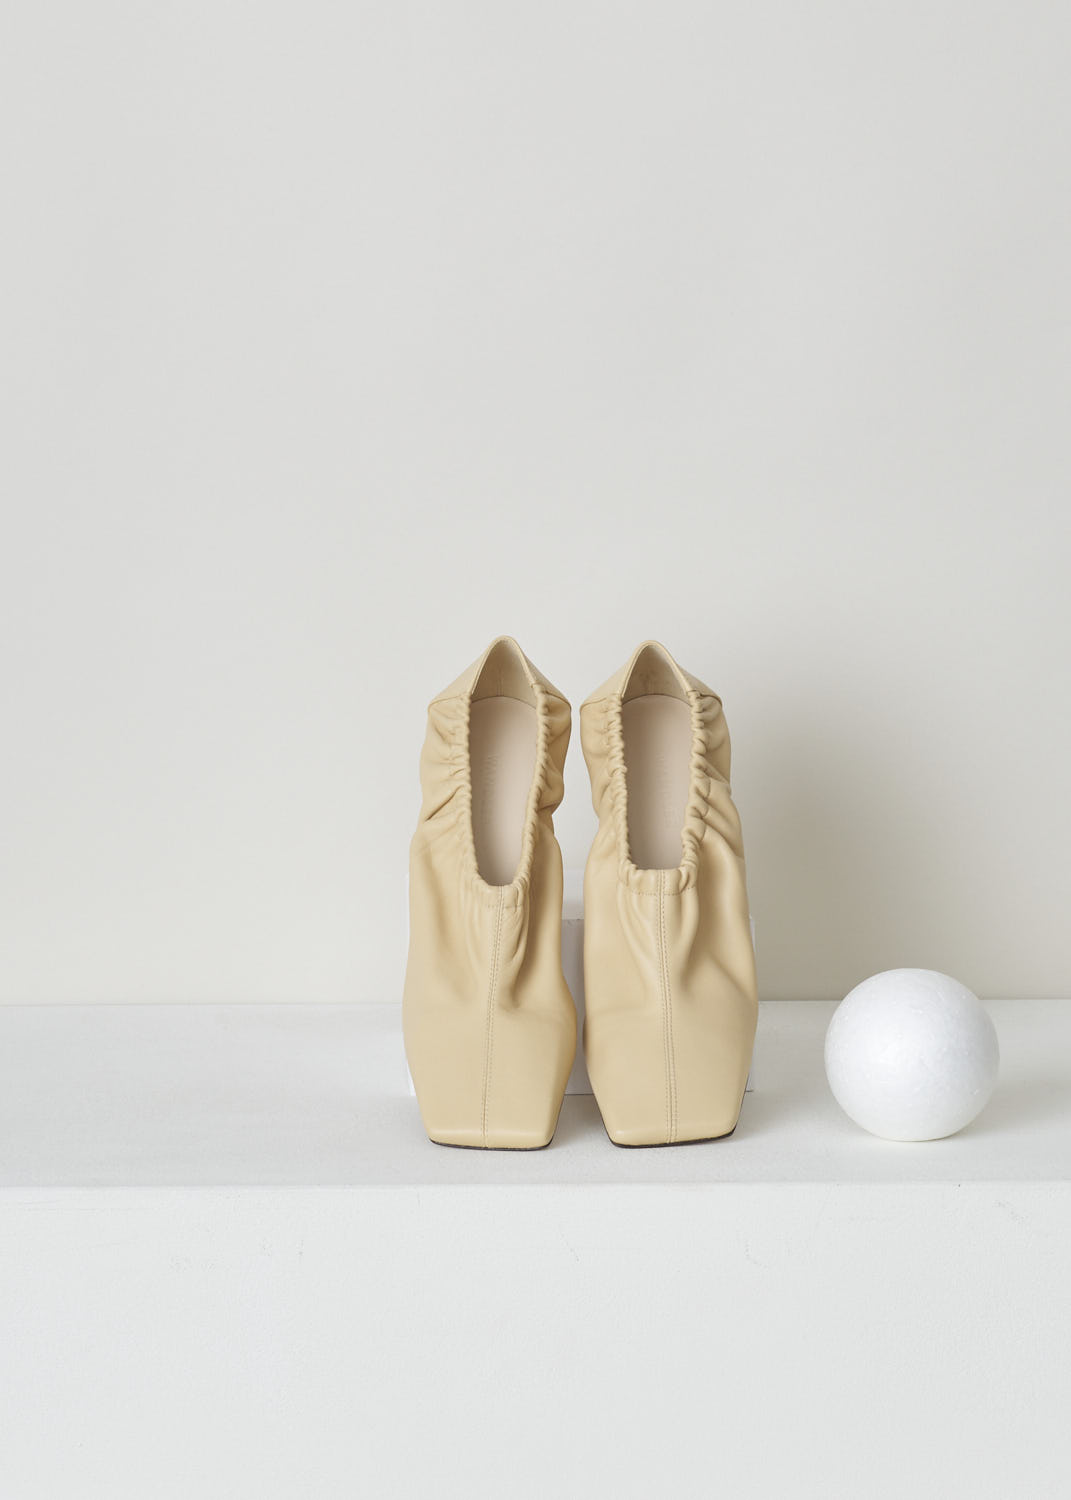 WANDLER, NUDE HEELED MULE WITH ELASTICATED DETAIL, MIA_MULE_21204_221201_1256_CASHEW, Beige, Top, These nude slip-on mule feature a gathered/wrinkled elasticated band around the ankle, a square toe and a block heel.

Heel height: 8.5 cm / 3.3 inch 
